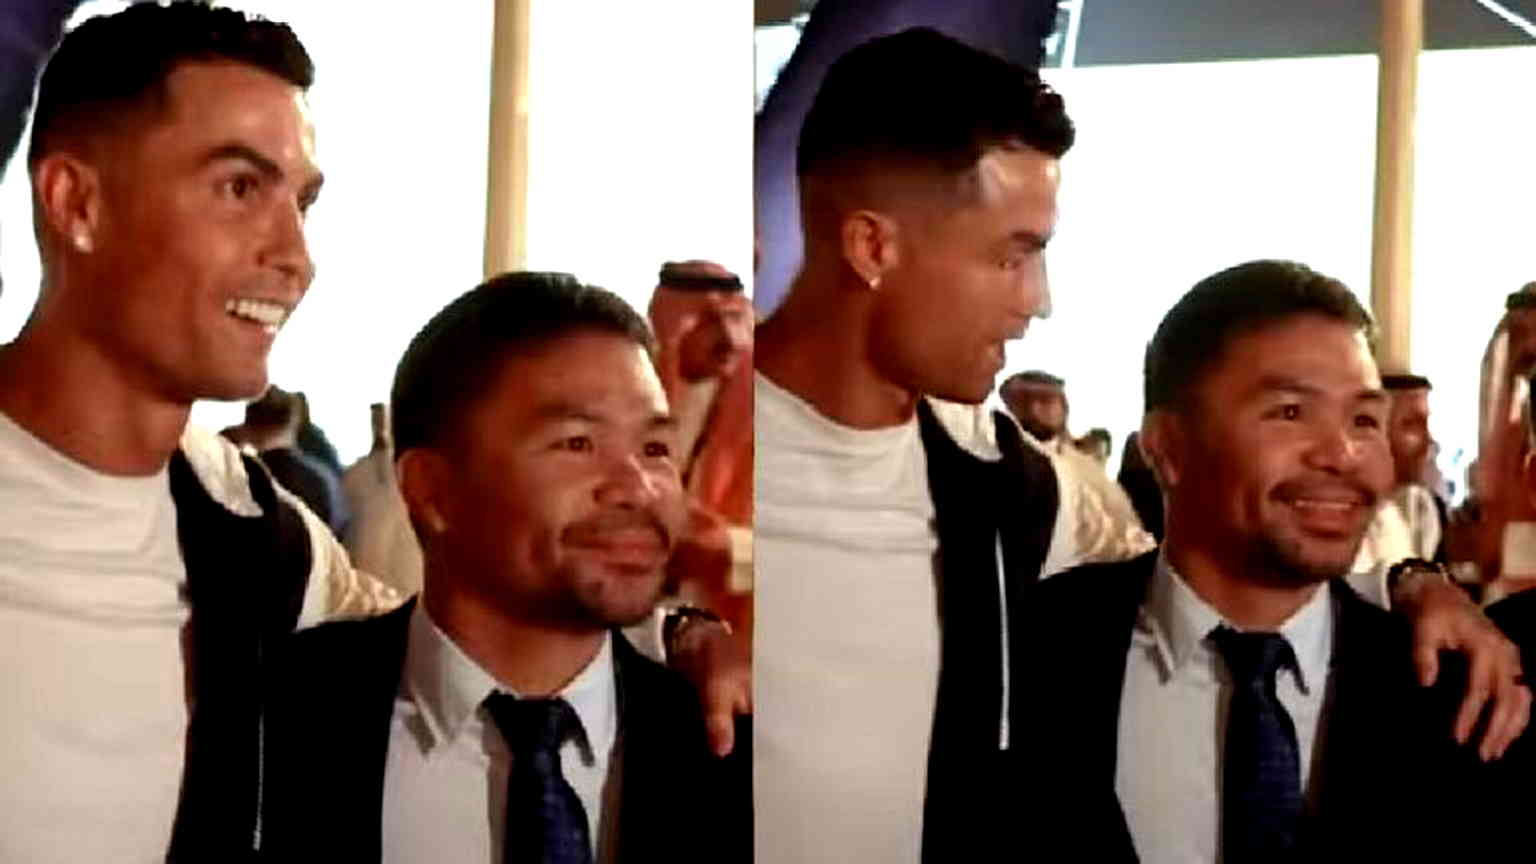 Watch: Cristiano Ronaldo yells out to Manny Pacquiao in wholesome encounter in Riyadh